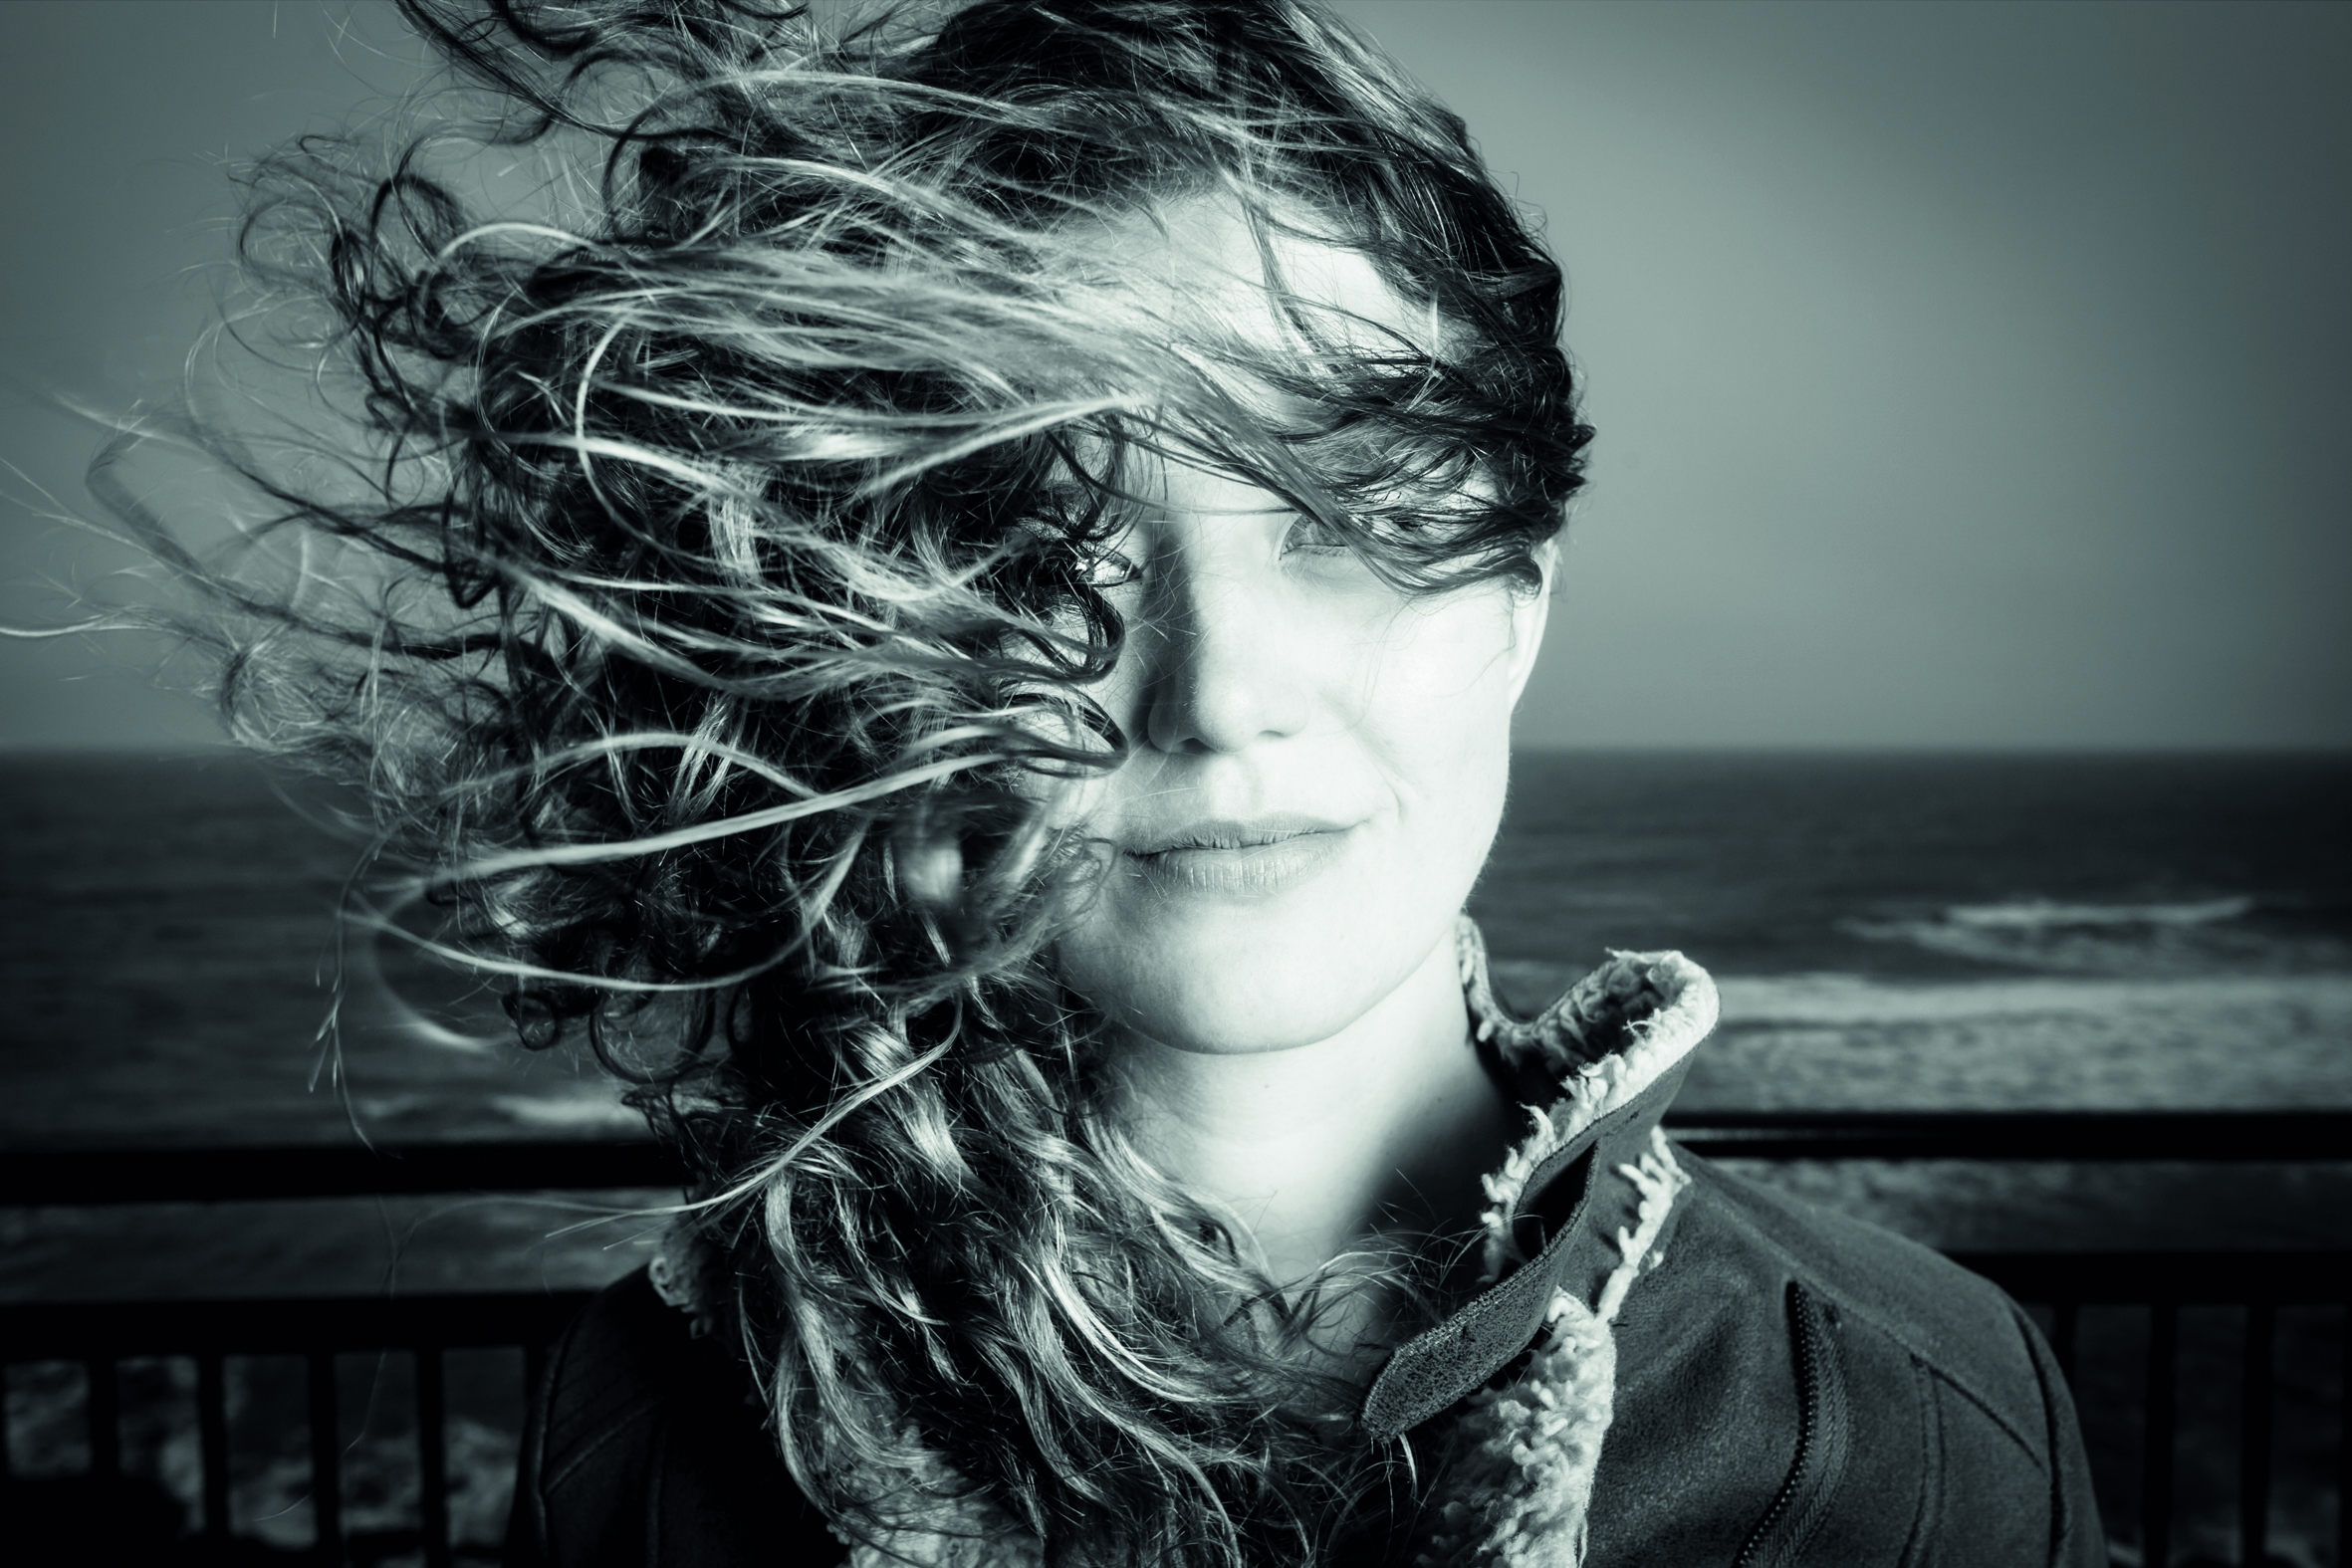 A portrait of Hannah George with her hair blowing on a windswept beach